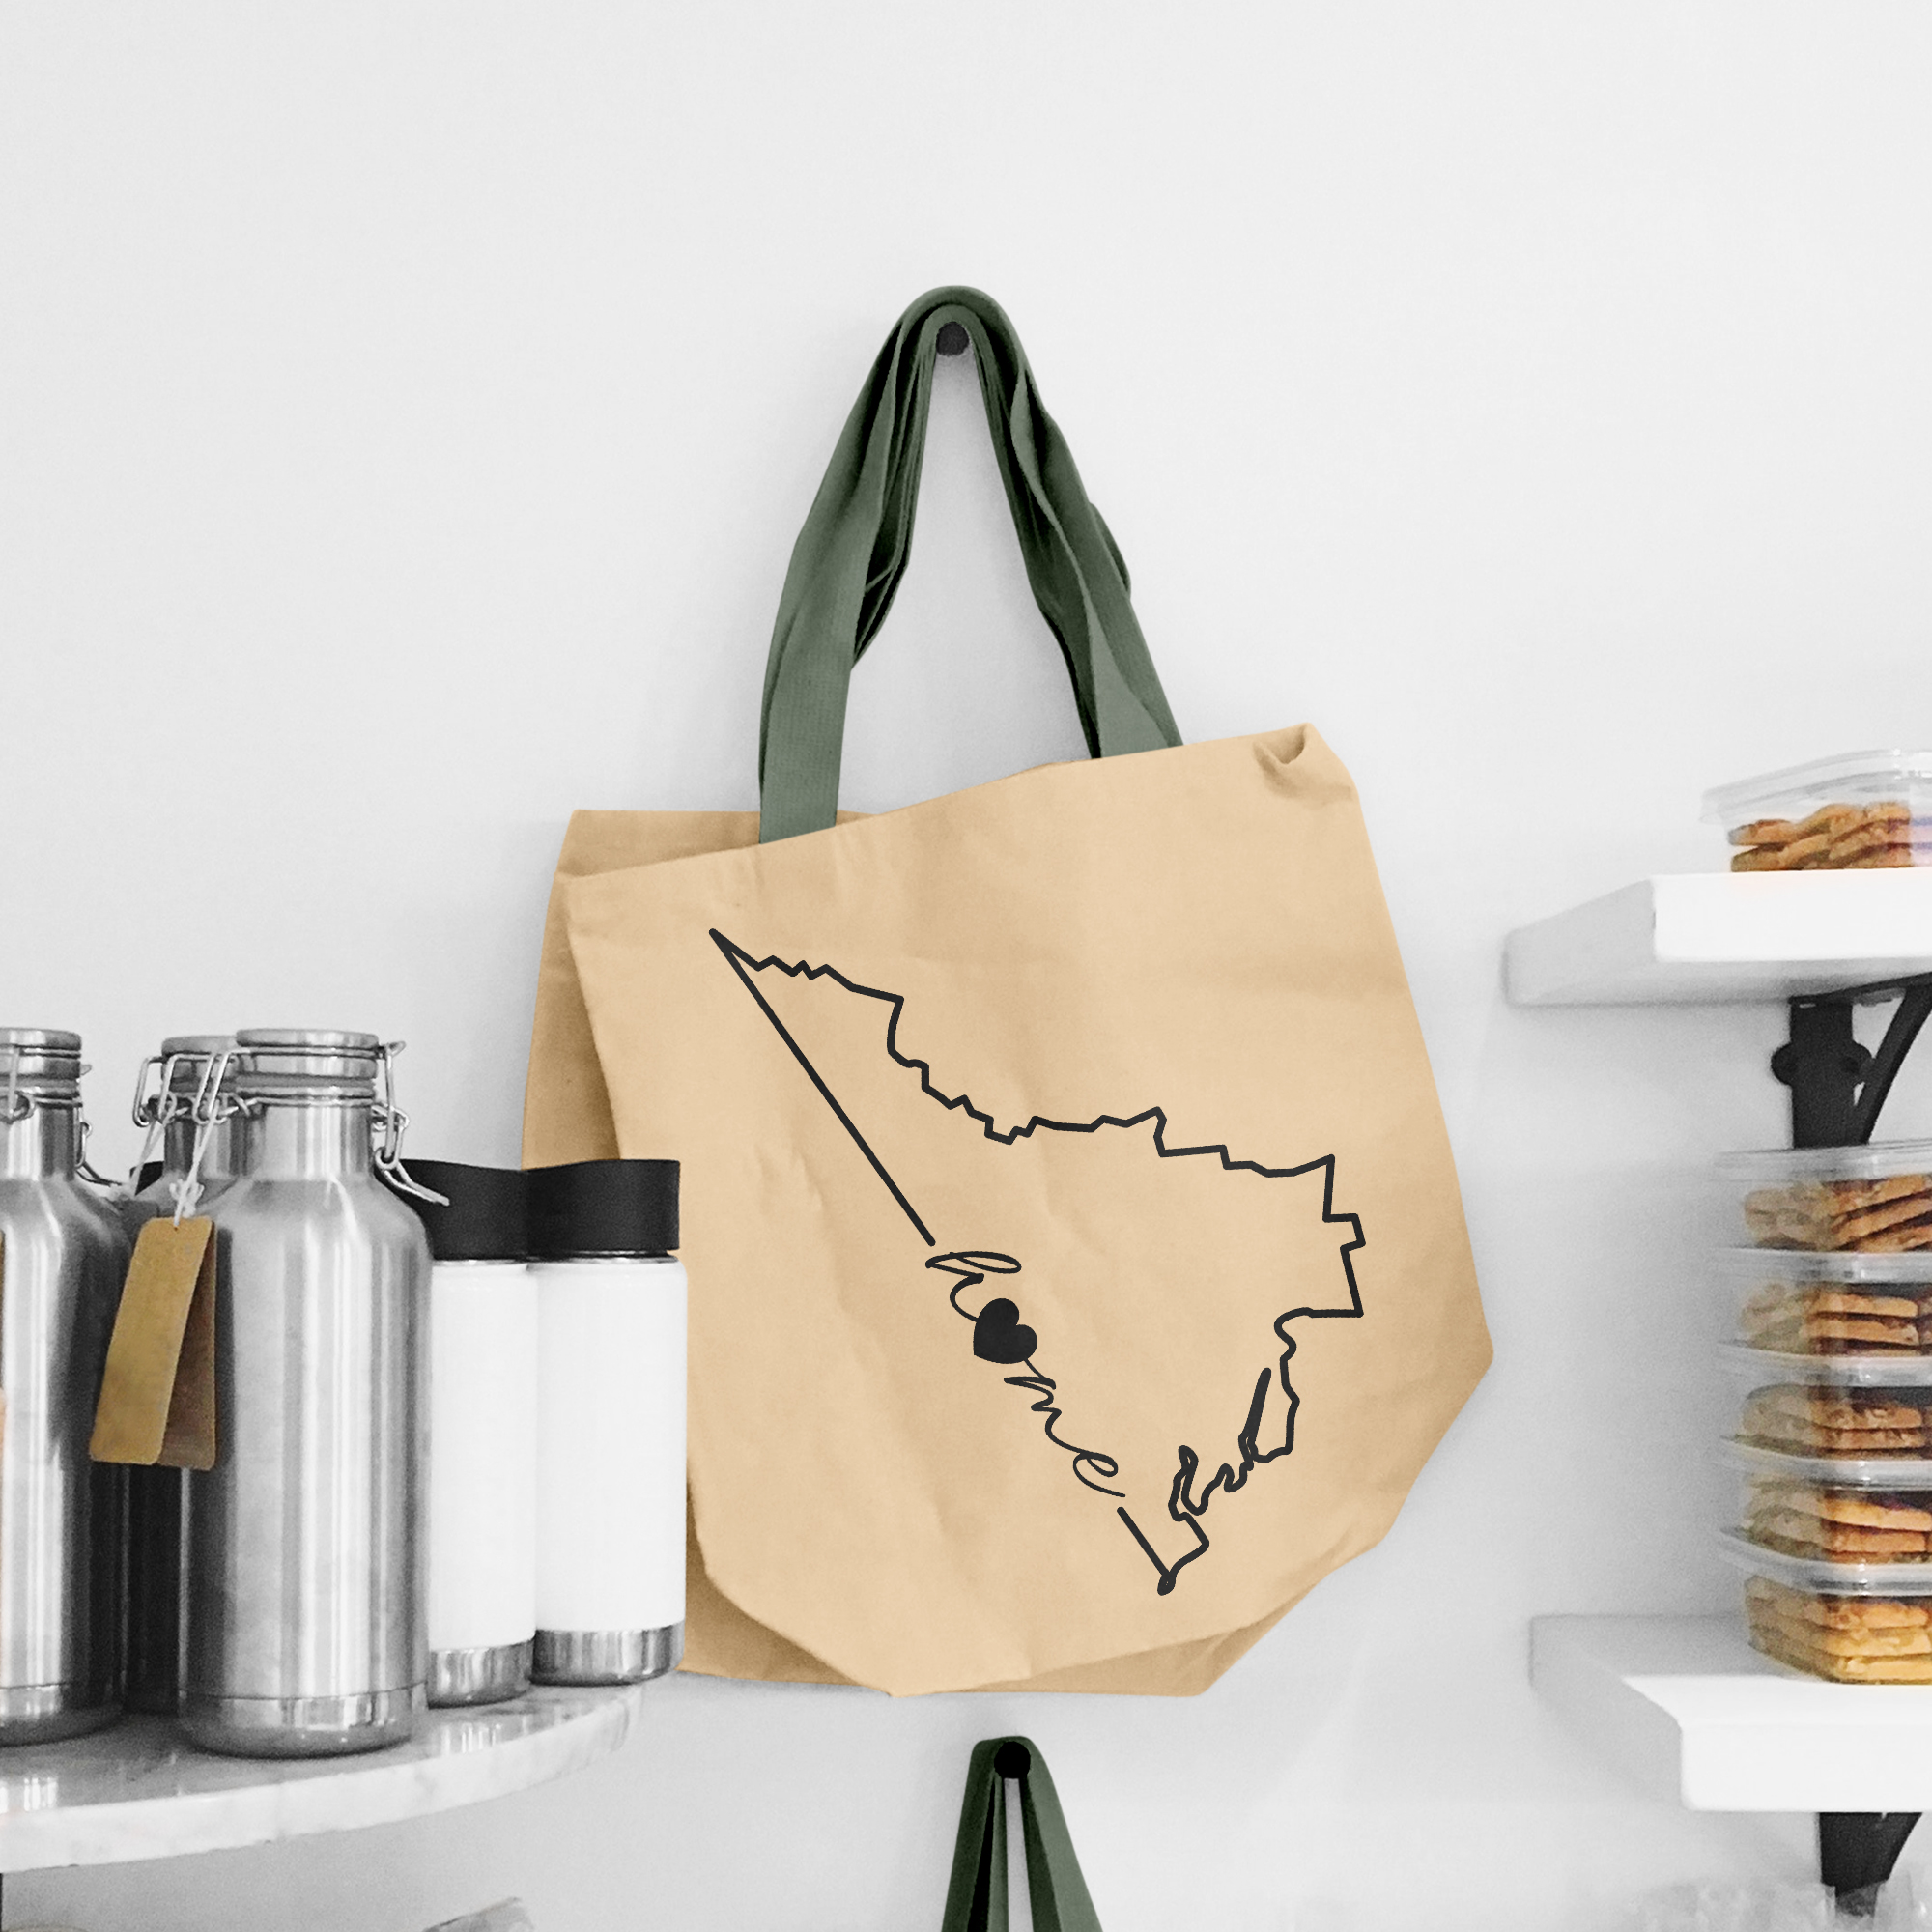 Black illustration of map of Virginia on the beige shopping bag with dirty green handle.